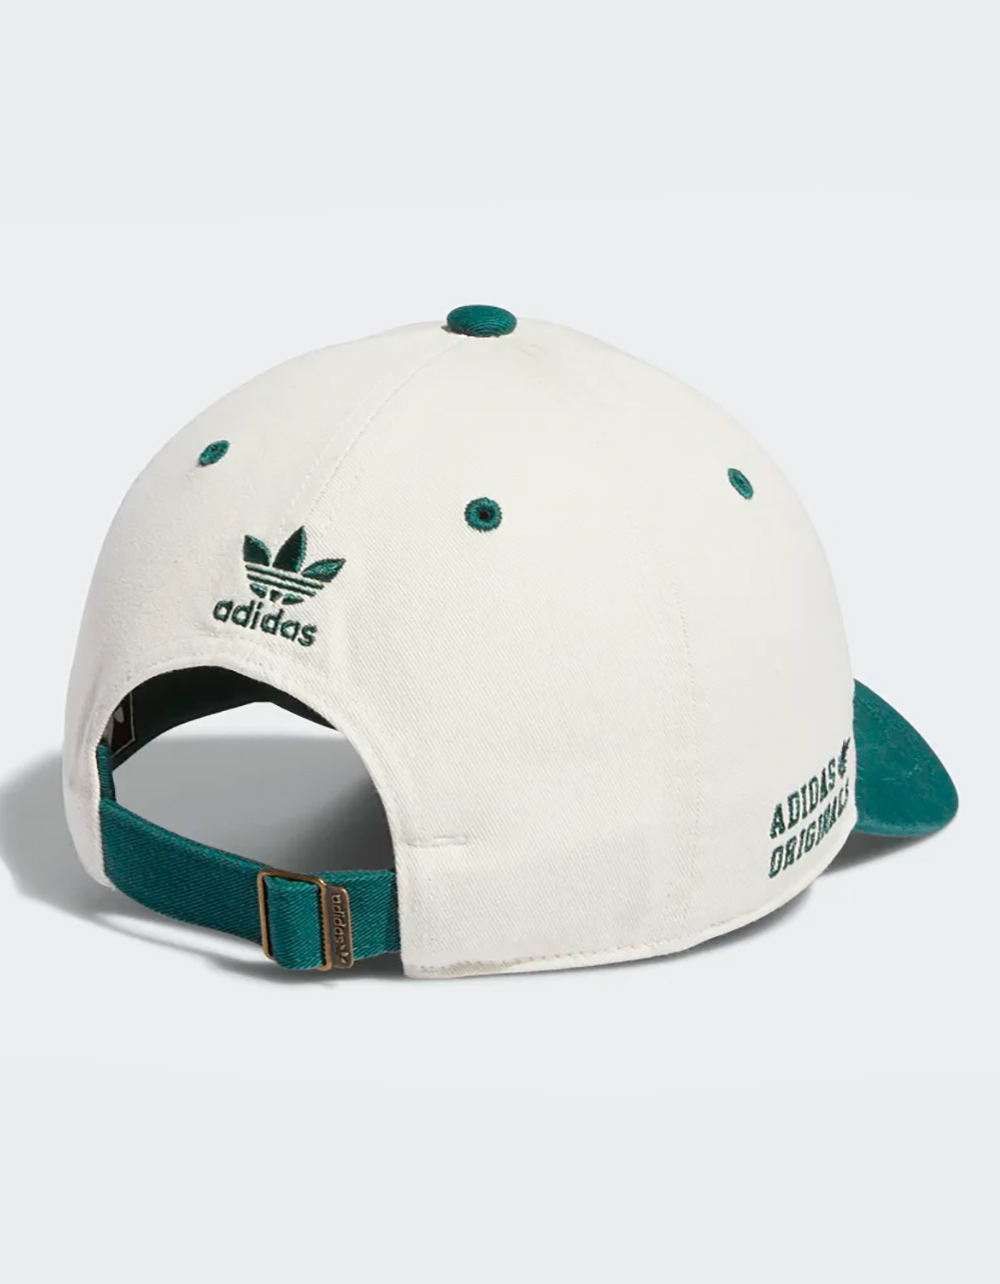 Agnes Gray marionet Prime ADIDAS Originals Relaxed New Prep Mens Strapback Hat - WHITE COMBO | Tillys